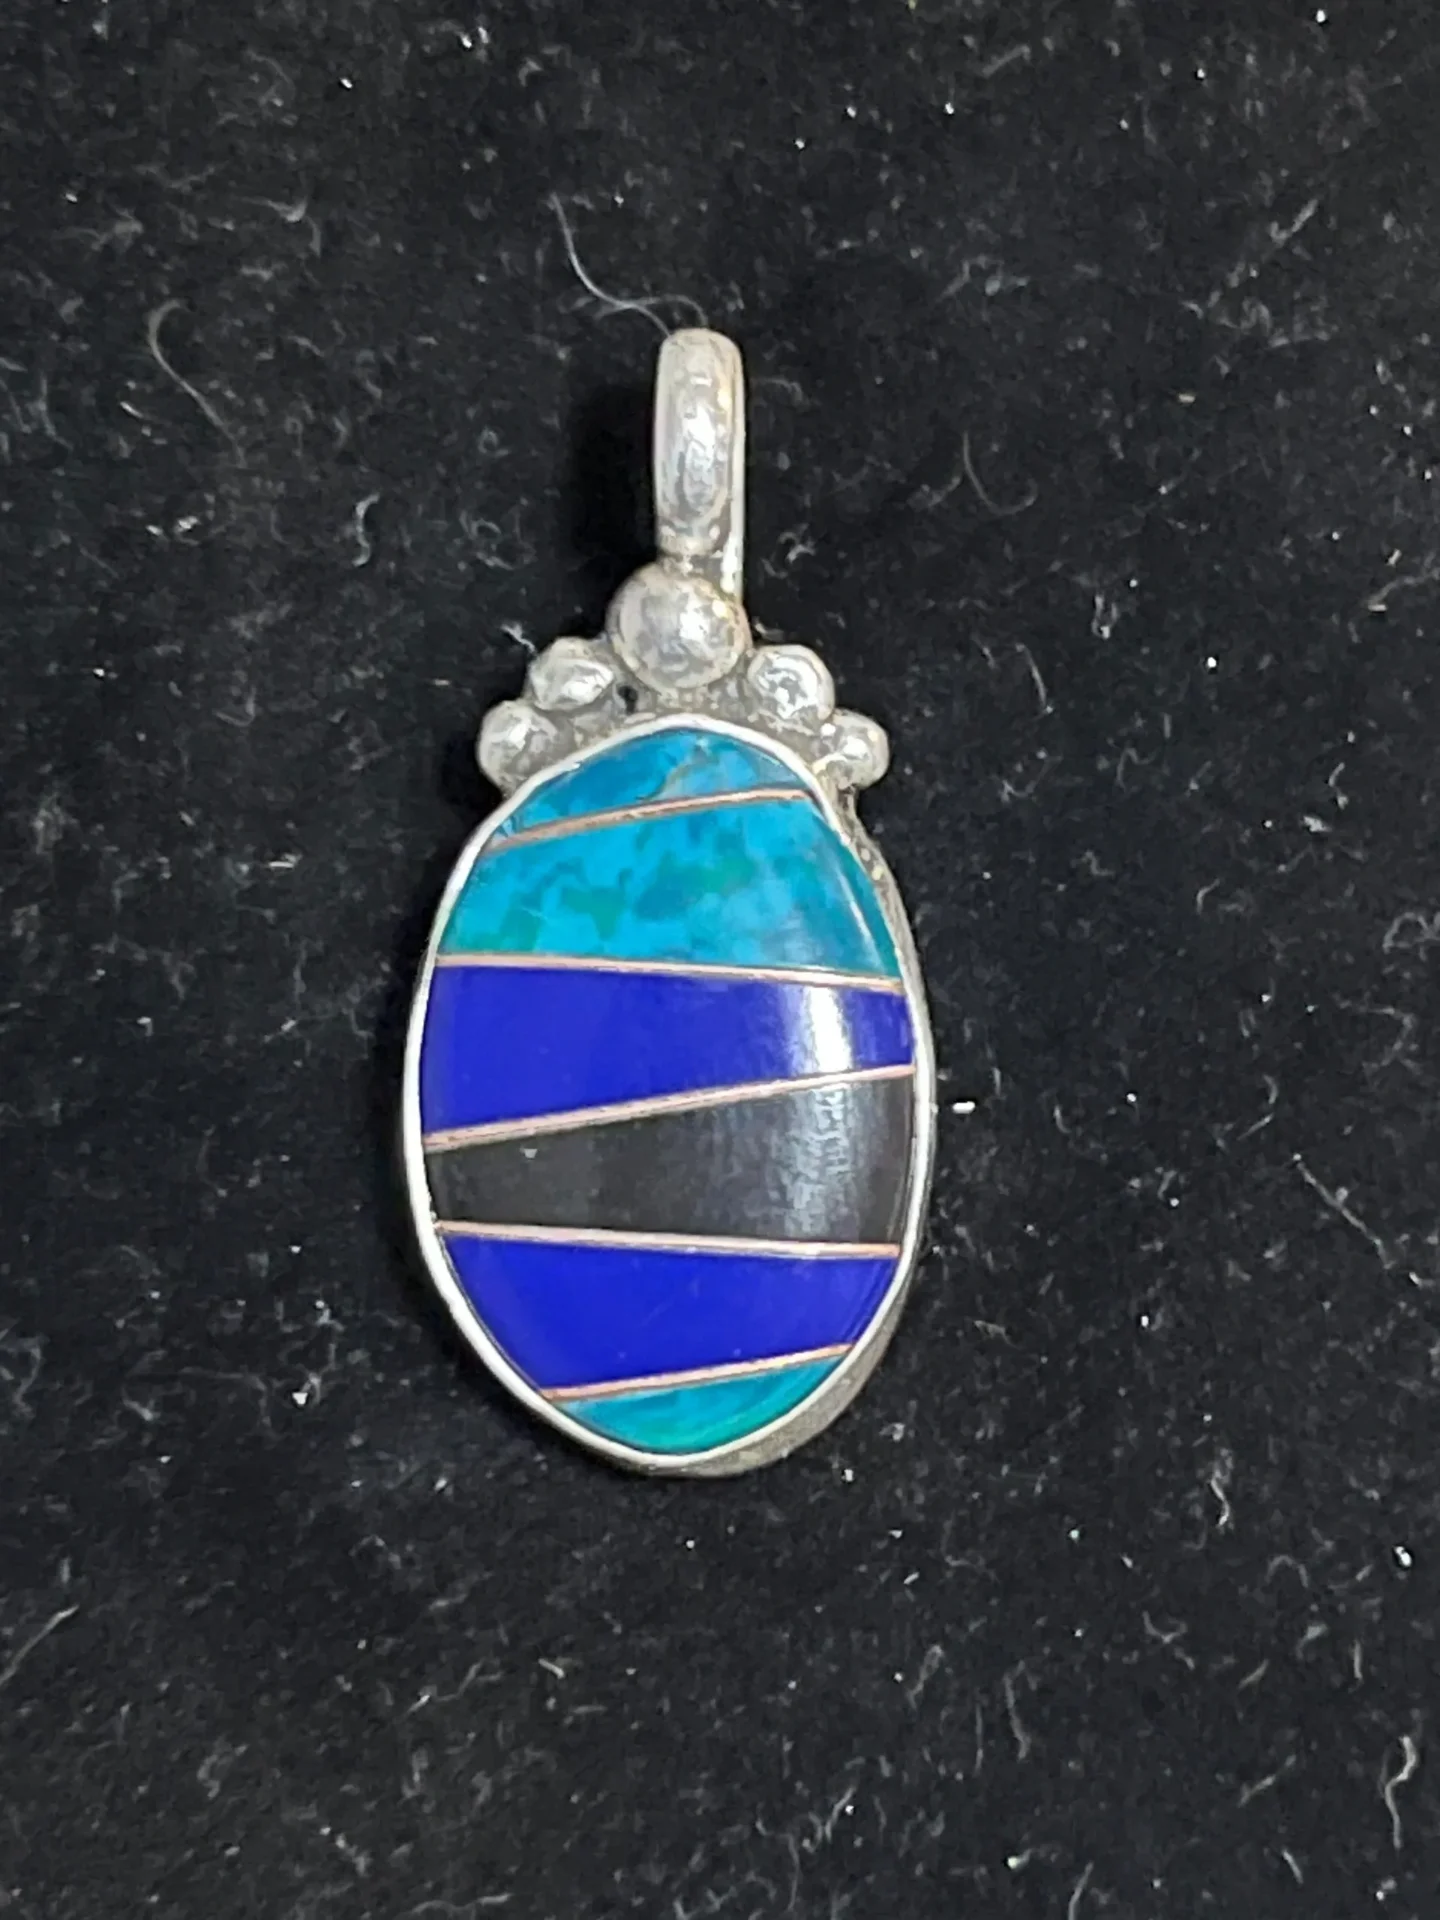 A blue and black pendant is shown on the ground.